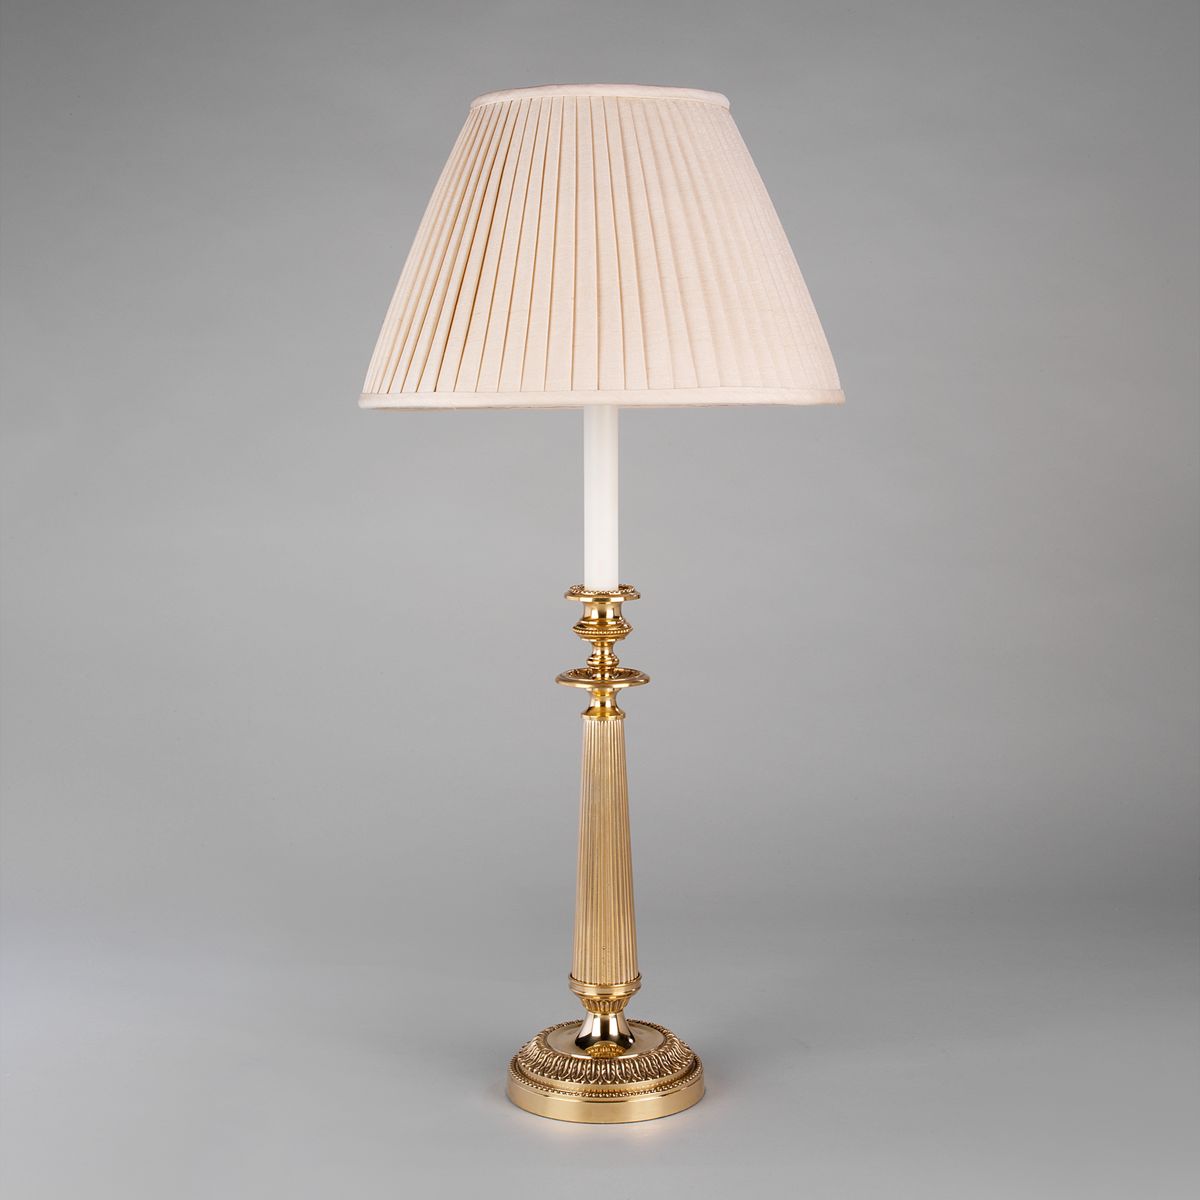 Reeded Candlestick Table Lamp - Antique Brass with Knife Pleated Cream Silk Lampshade